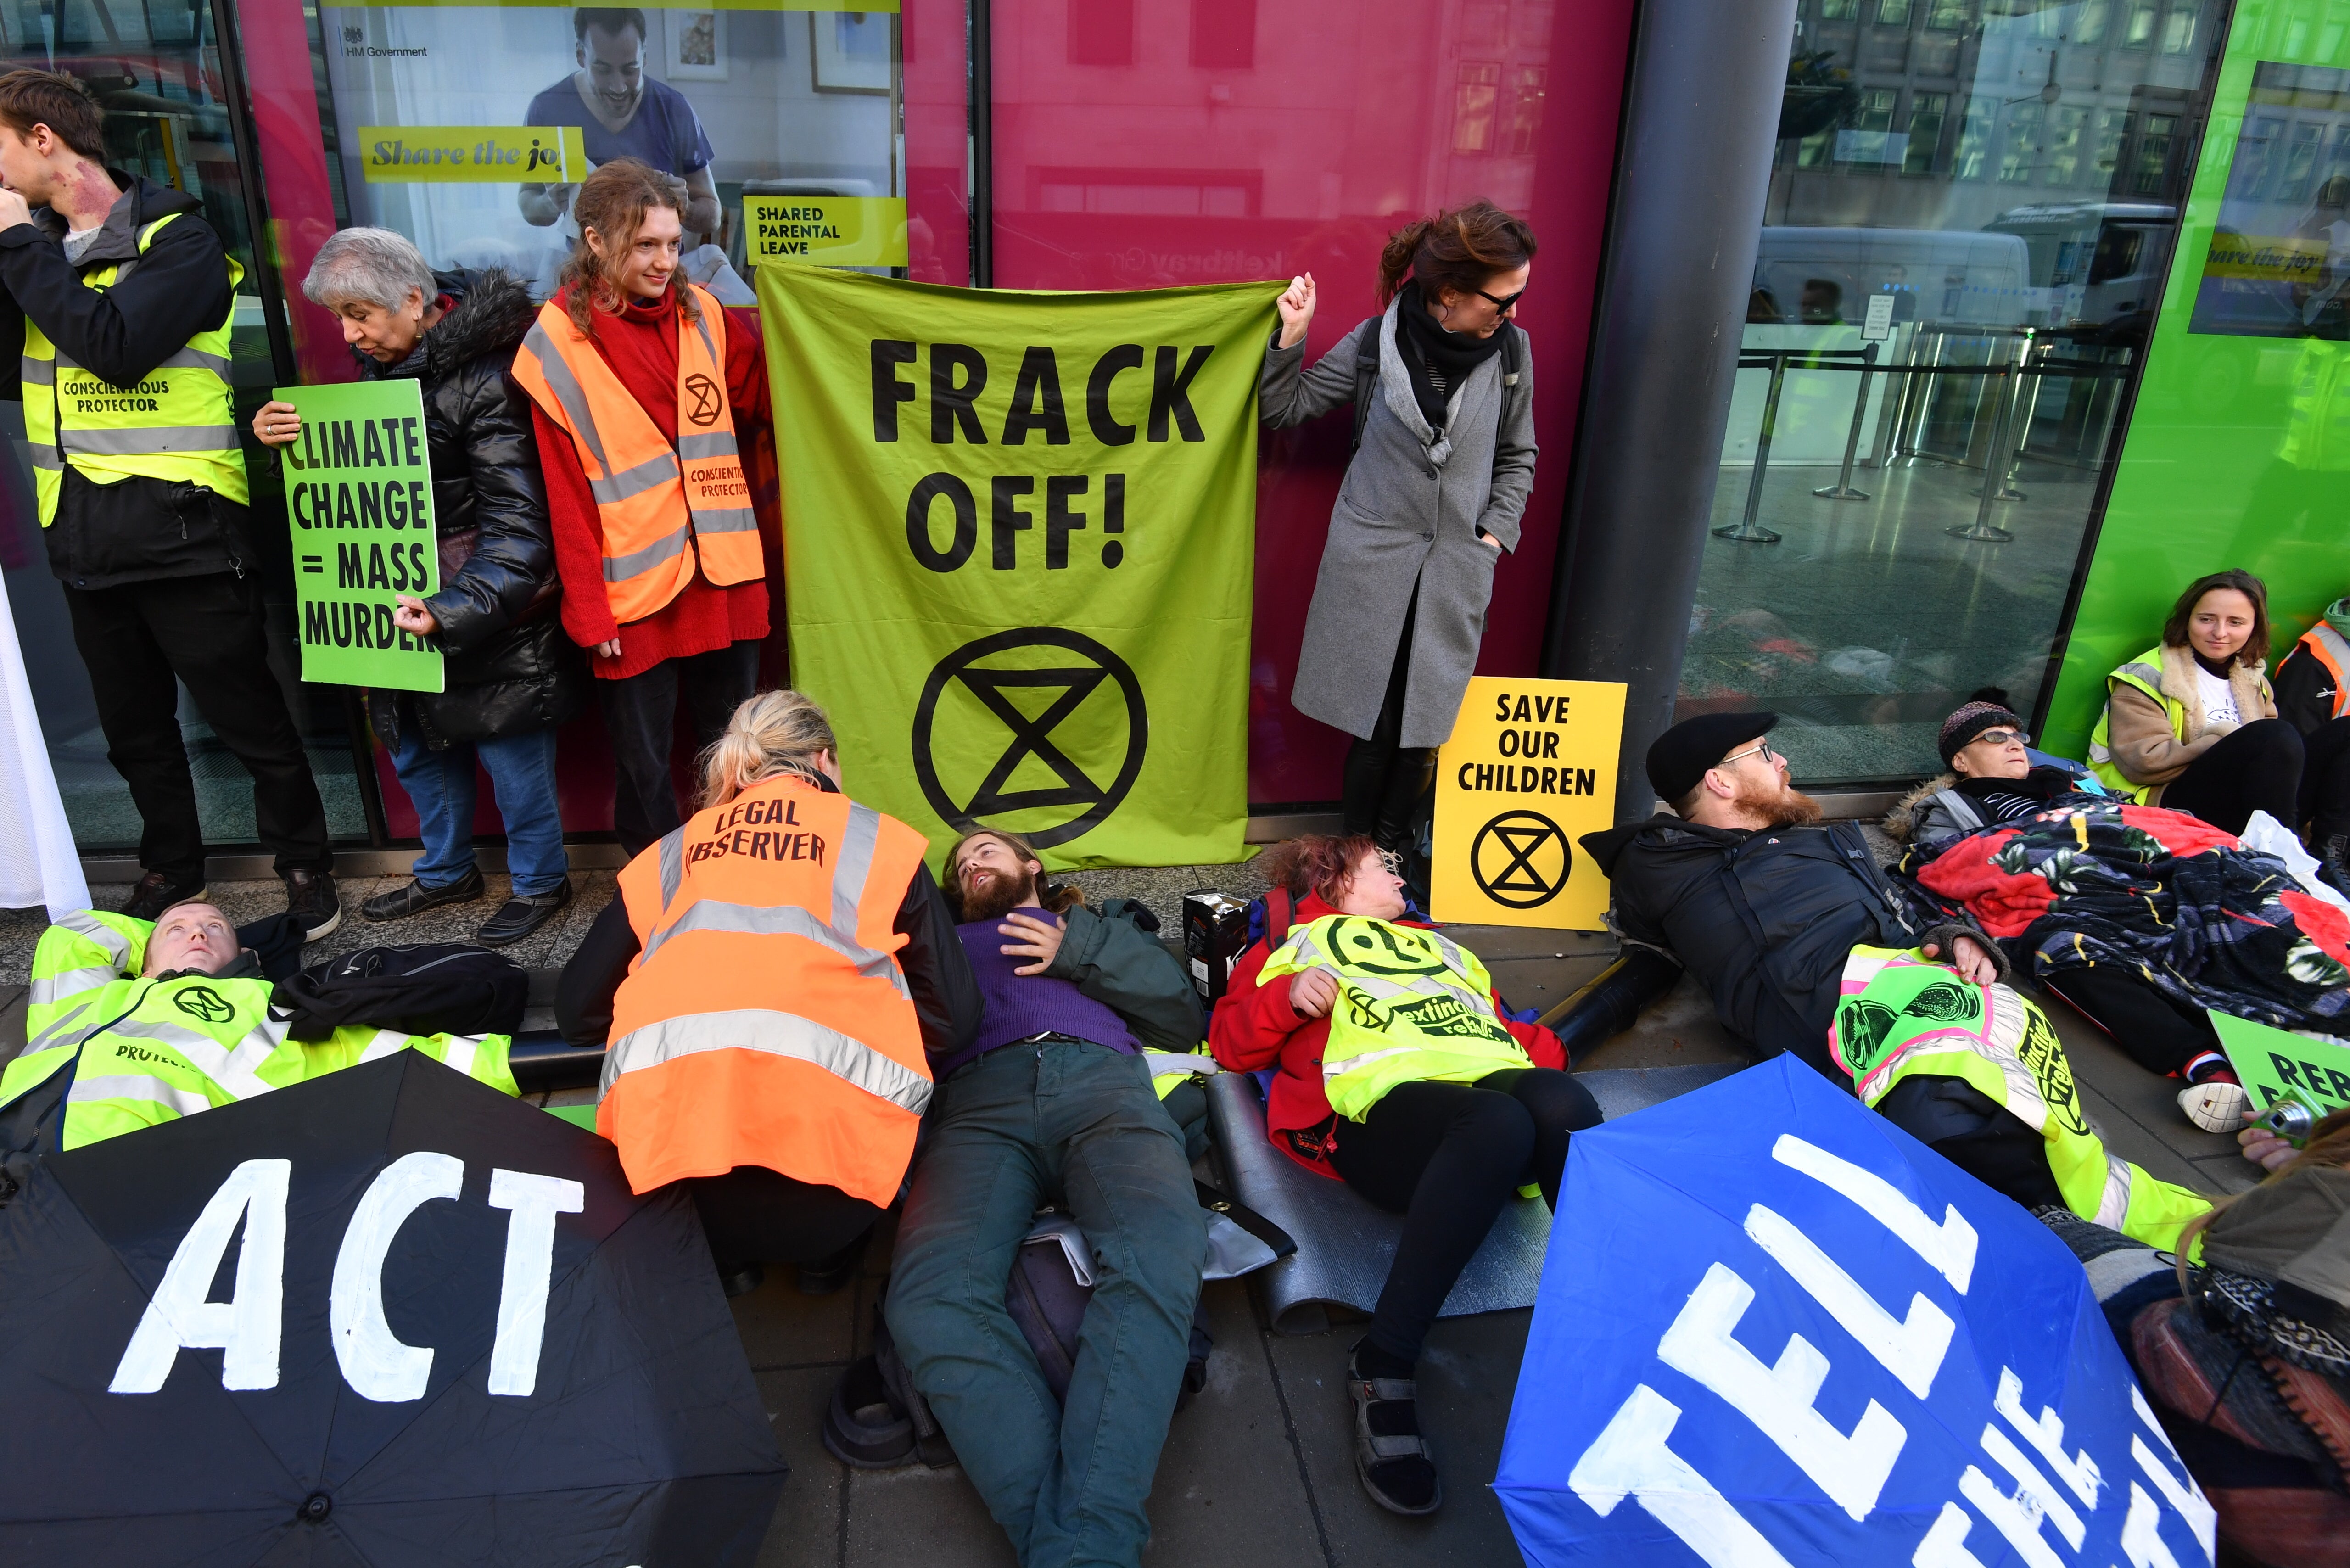 Activists from Extinction Rebellion stage an anti-fracking protest outside the Department for Business, Energy and Industrial Strategy in Westminster, London